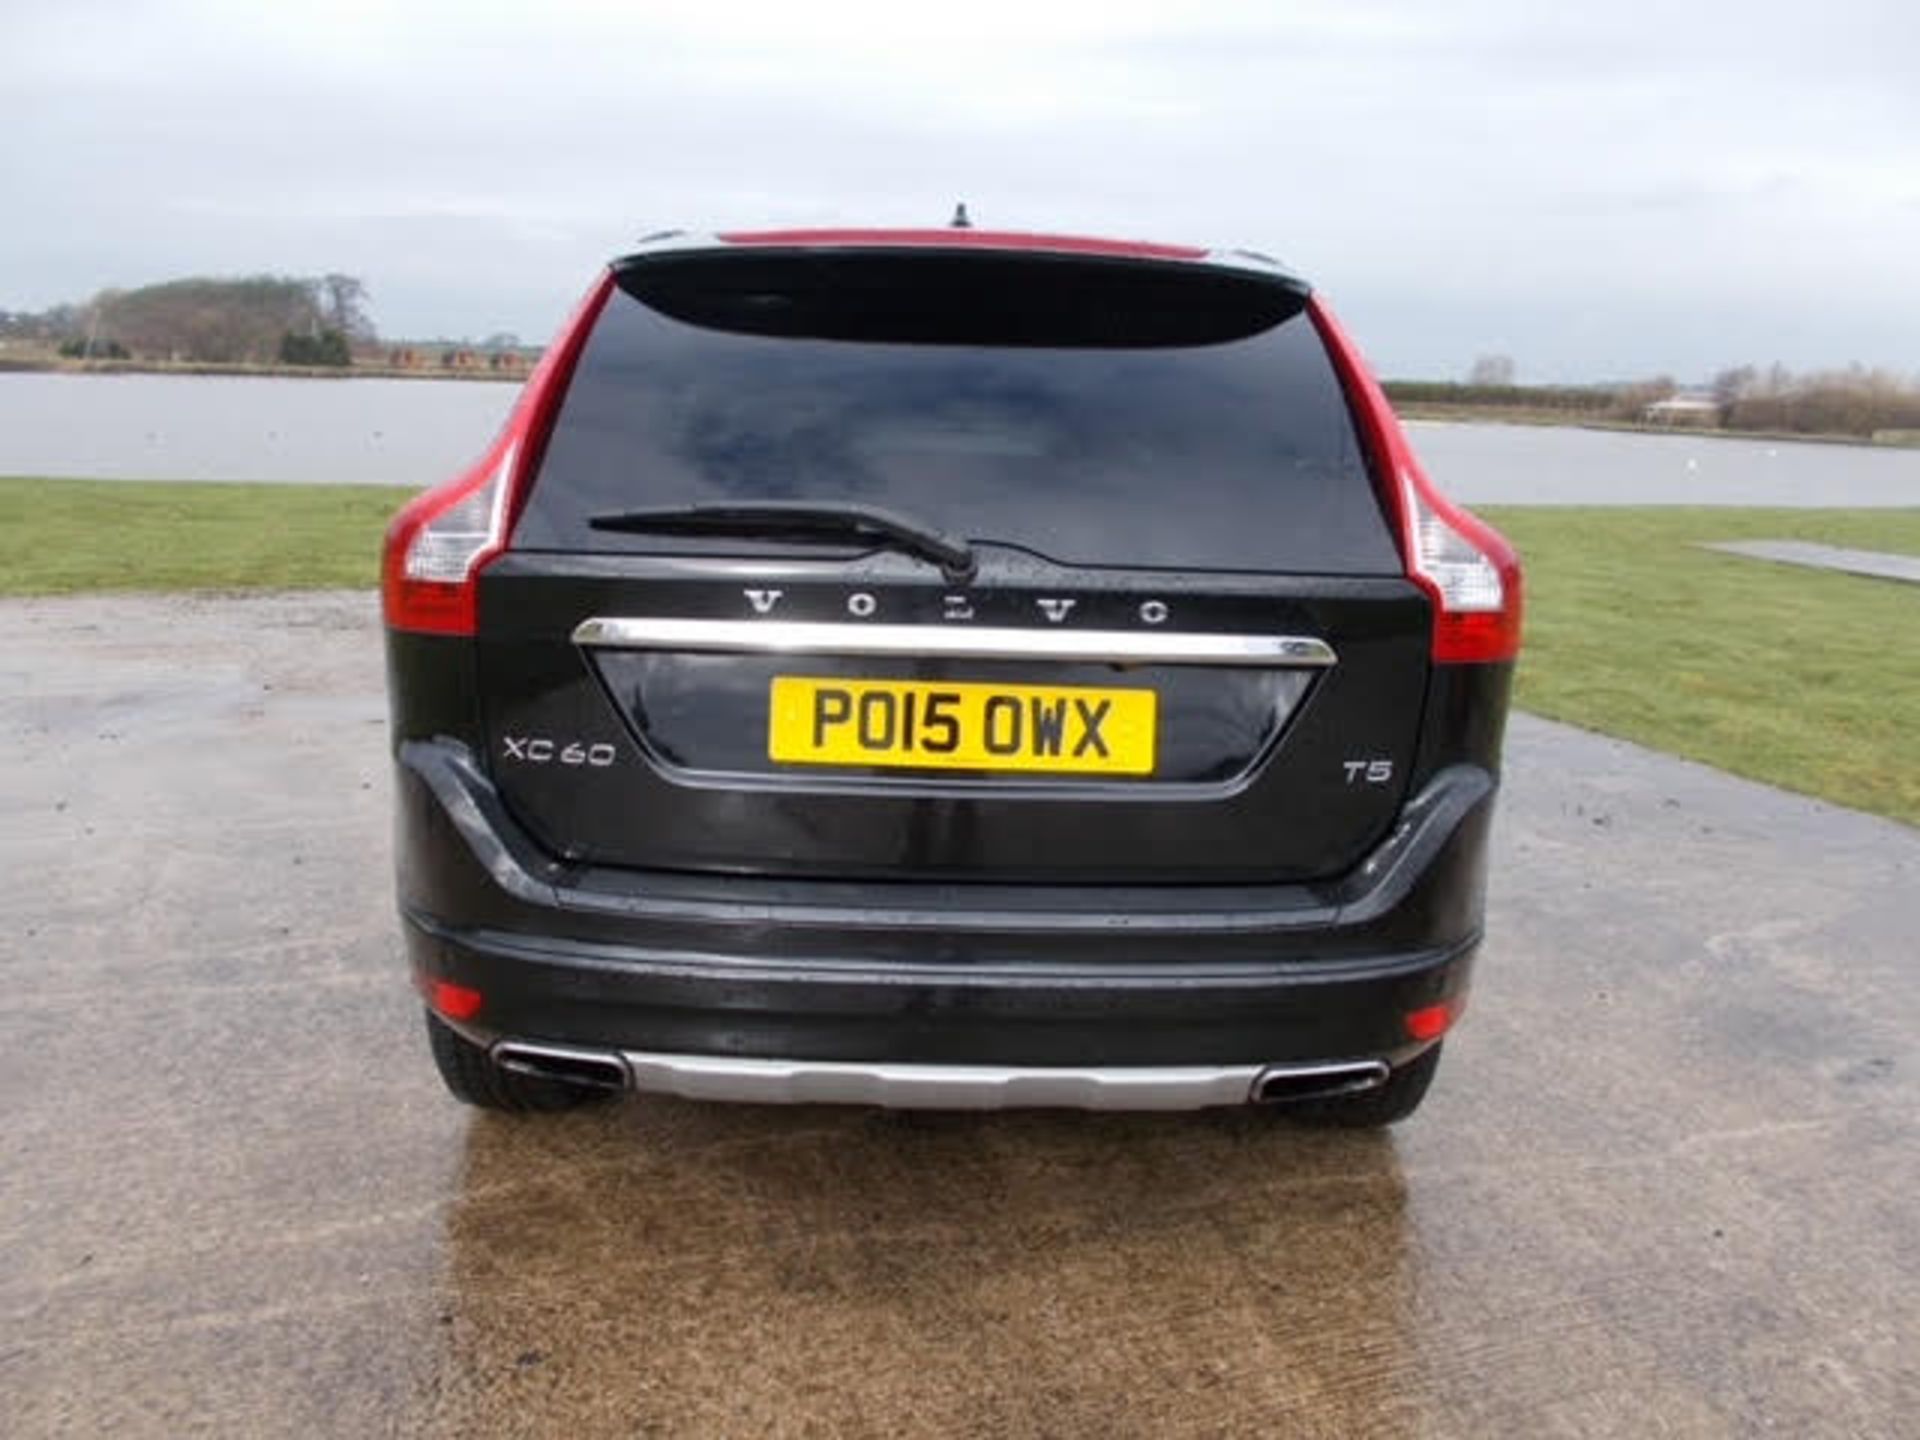 2015 (15) VOLVO XC60 AWD 2.0 PETROL AUTO BLACK, VDI CLEAR, 0 PREVIOUS KEEPERS *NO VAT* - Image 3 of 20